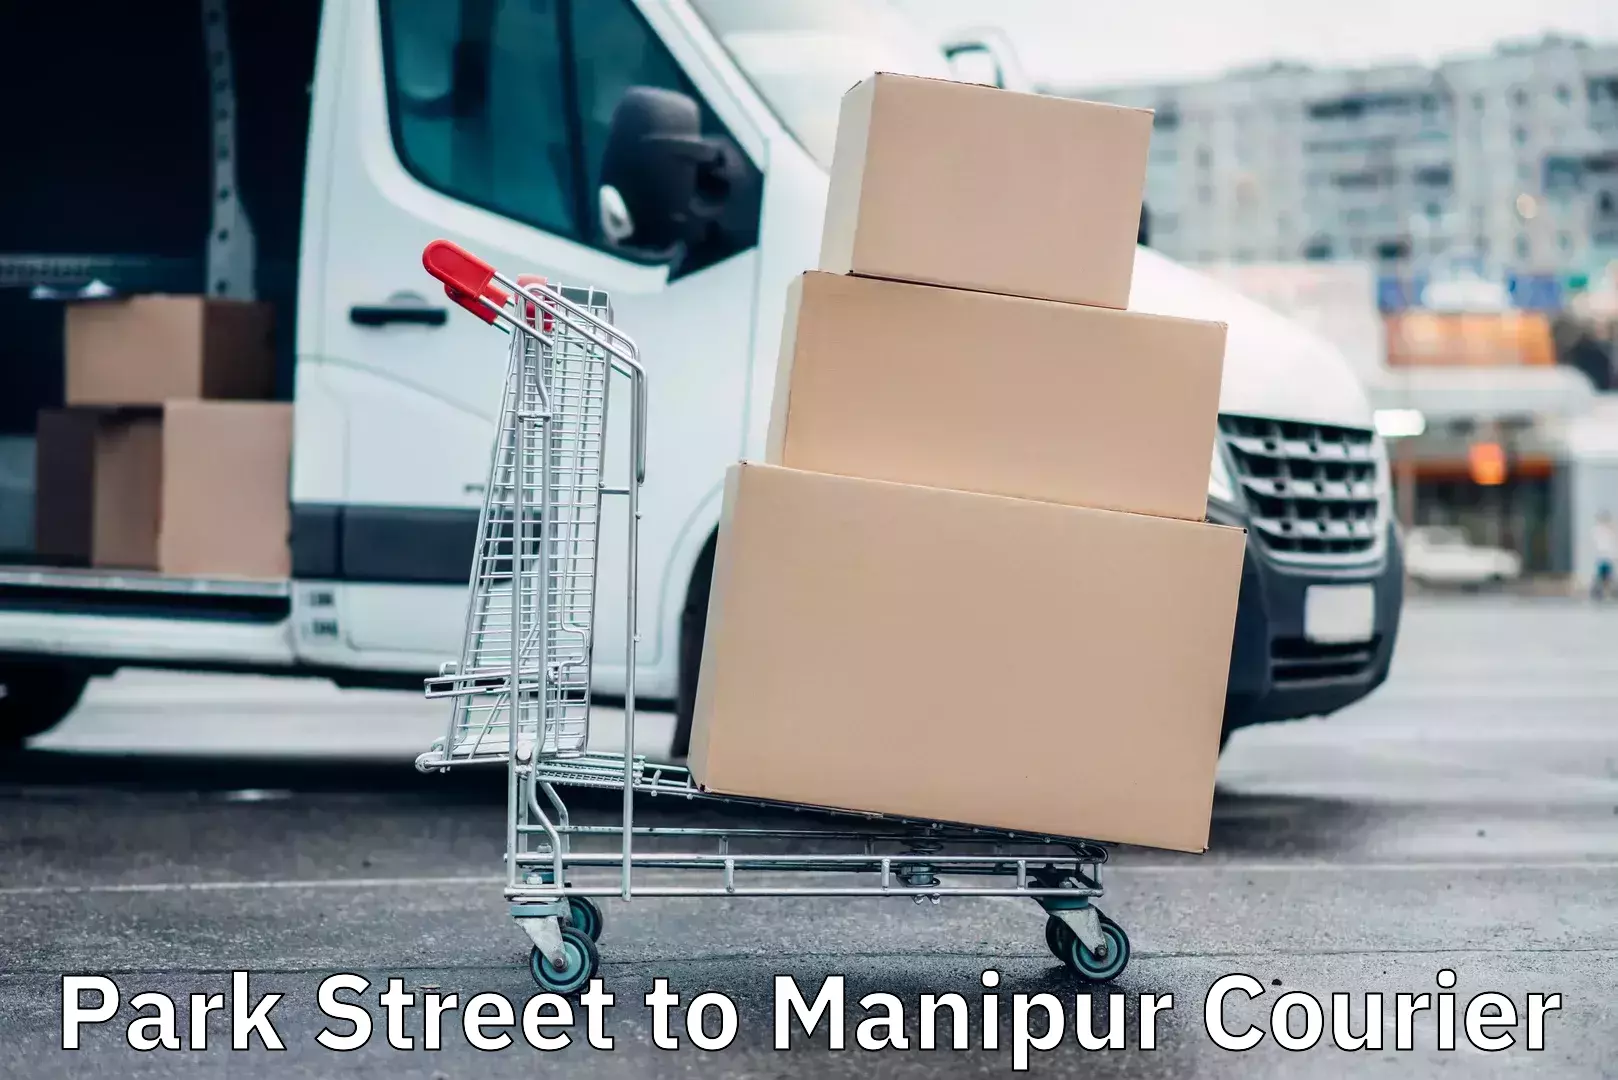 Fast delivery service Park Street to Manipur